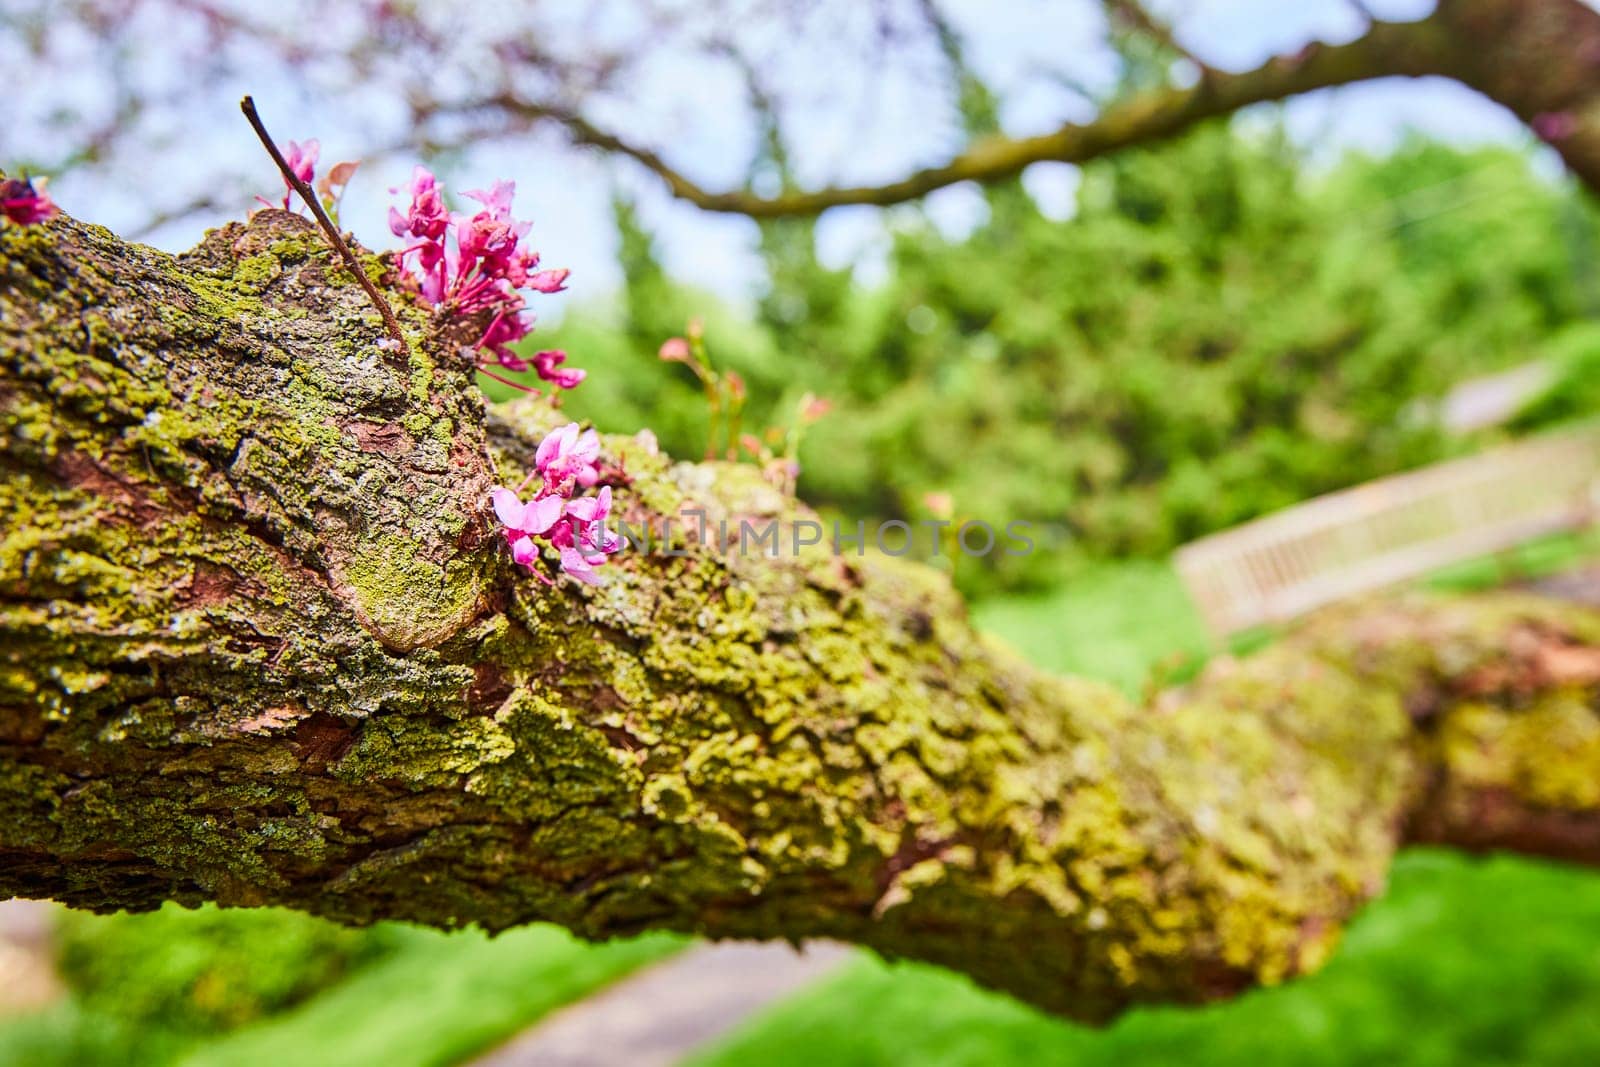 Mossy branch with pink blossoms in soft focus, symbolizing renewal in Warsaw Biblical Gardens.